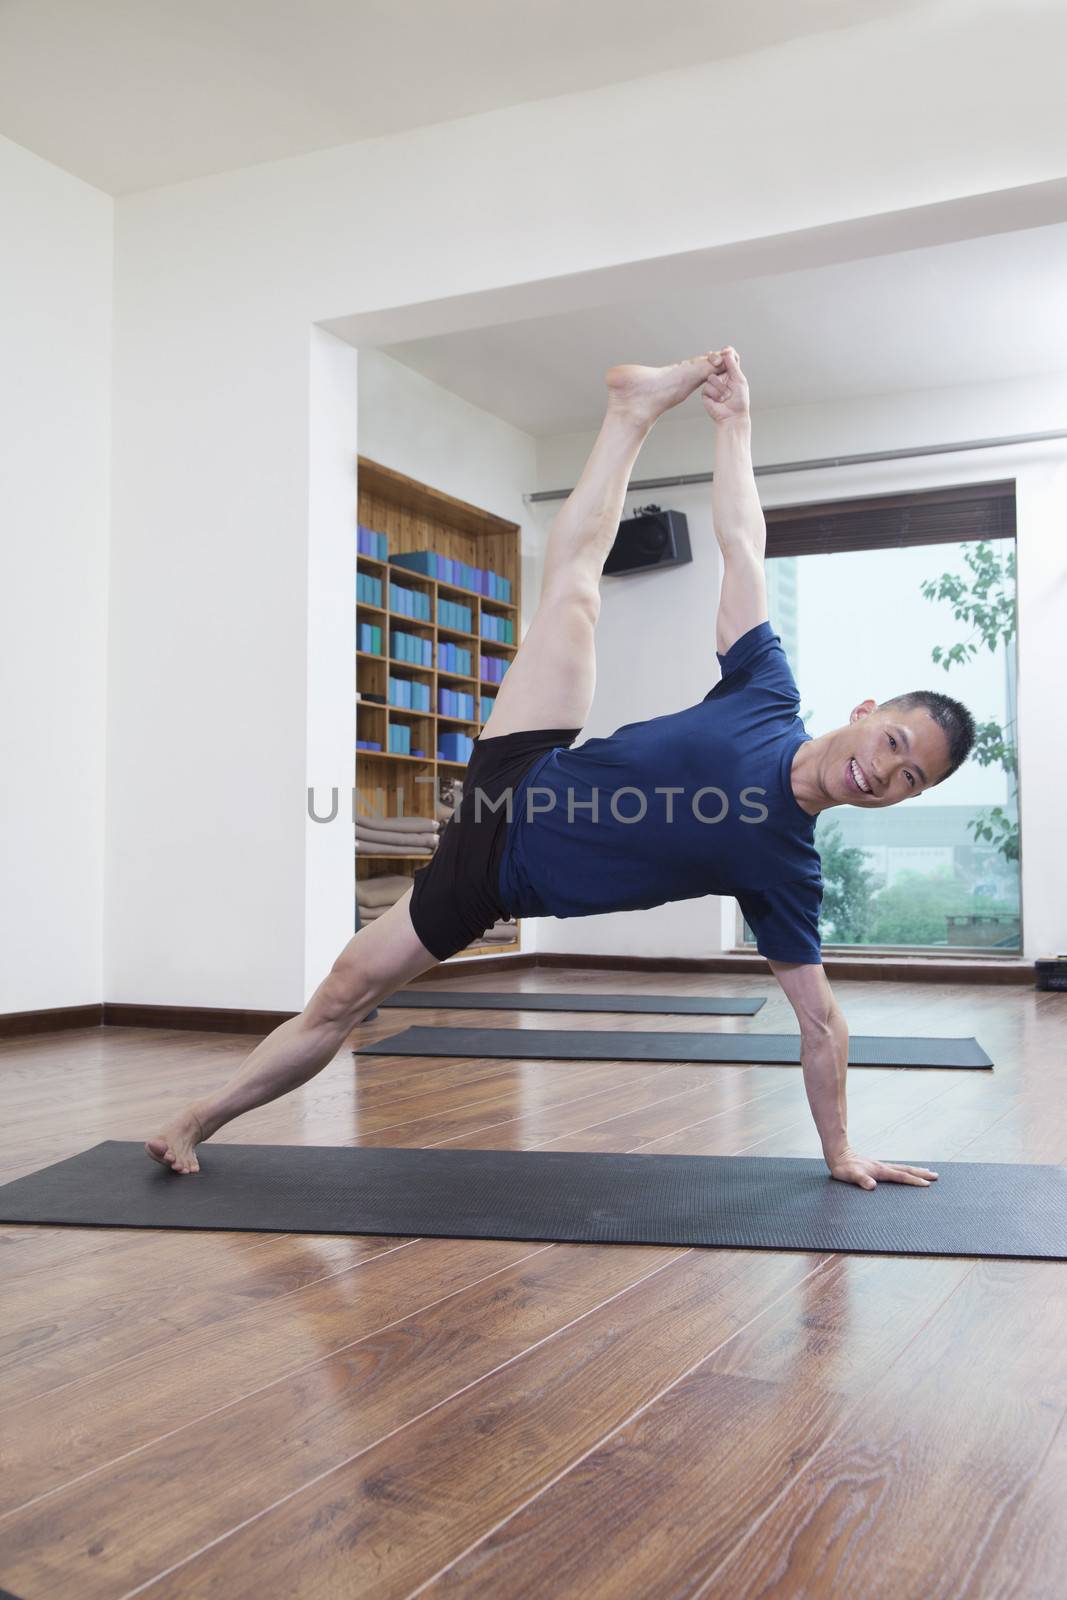 Man with legs raised and arms outstretched doing yoga in a yoga studio